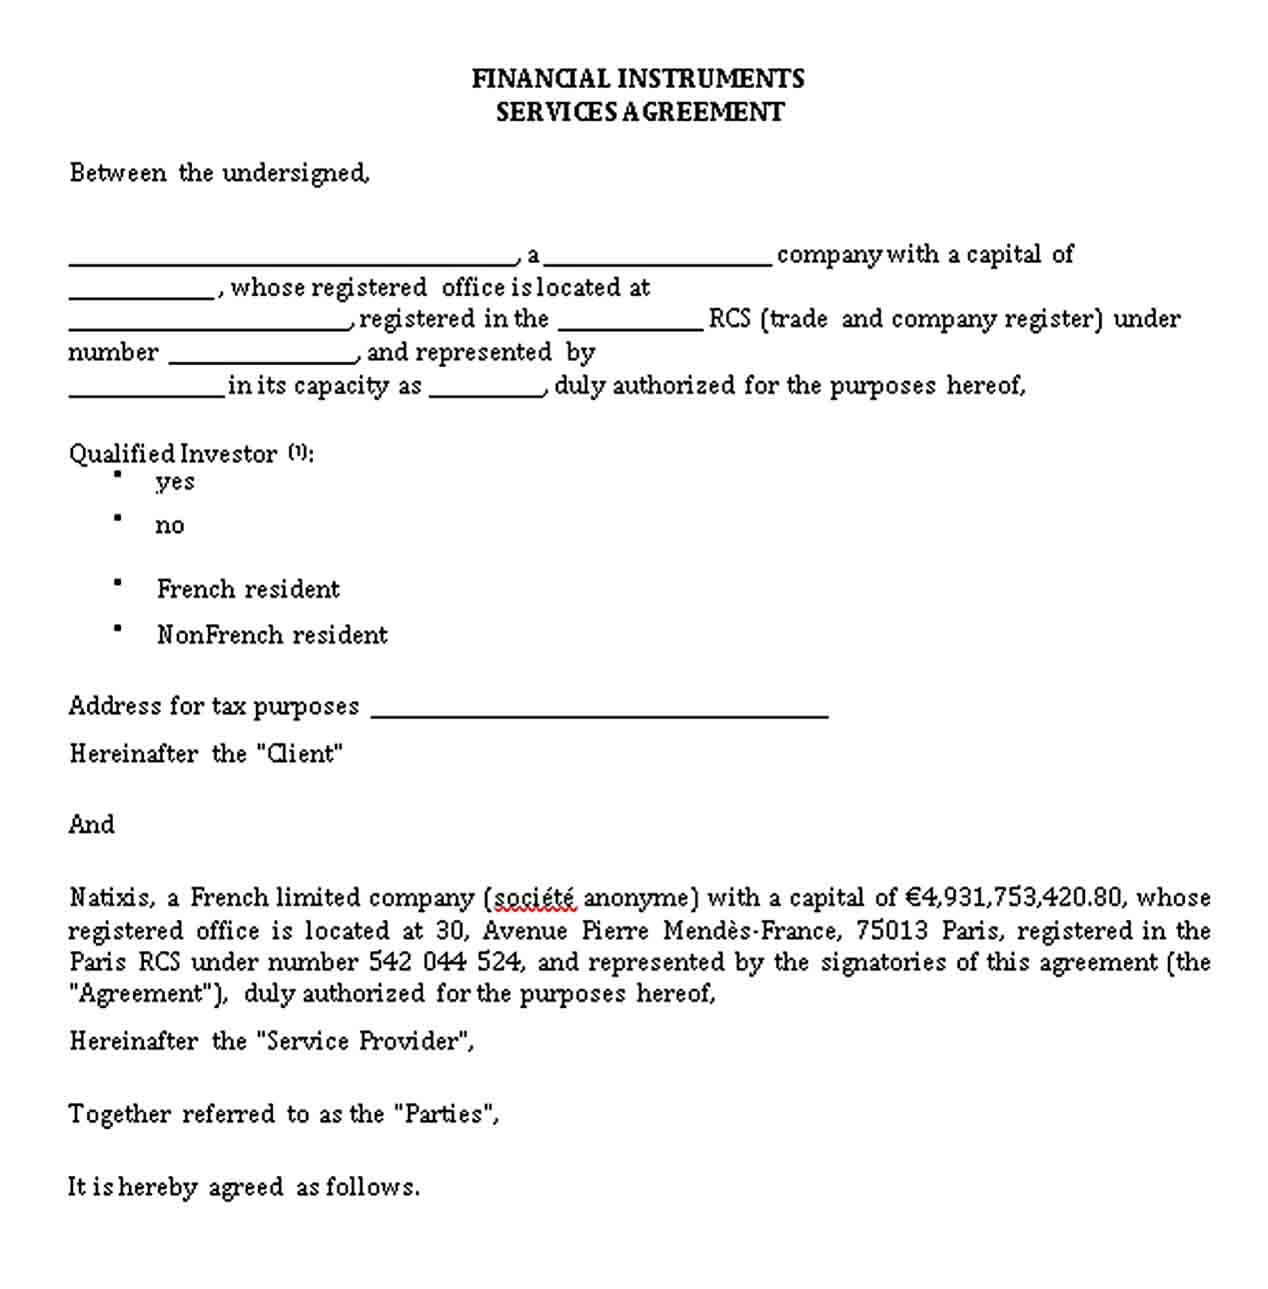 Sample Financial Instruments Services Agreement